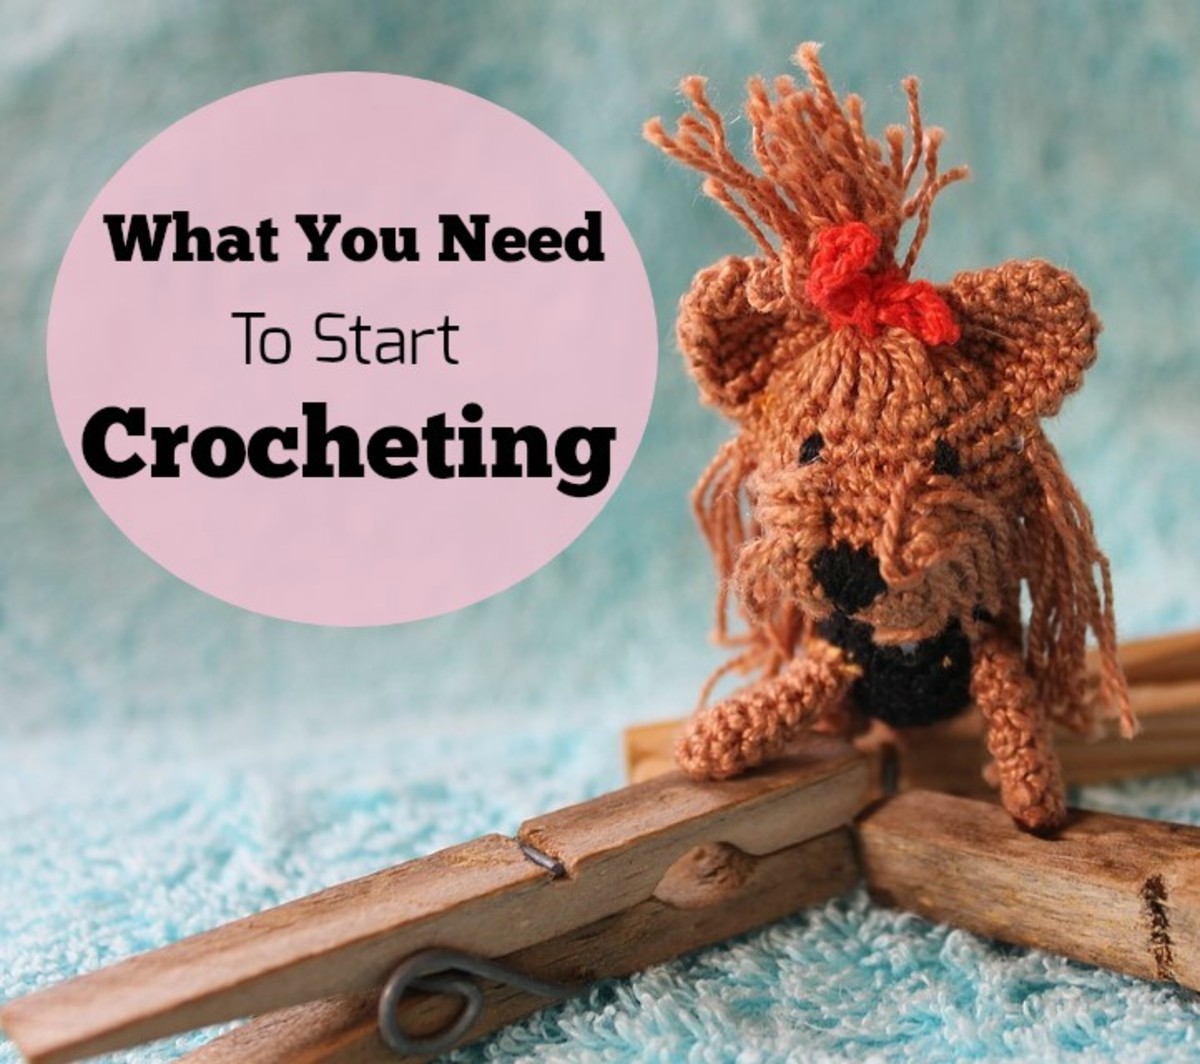 What Do I Need to Start Crocheting?